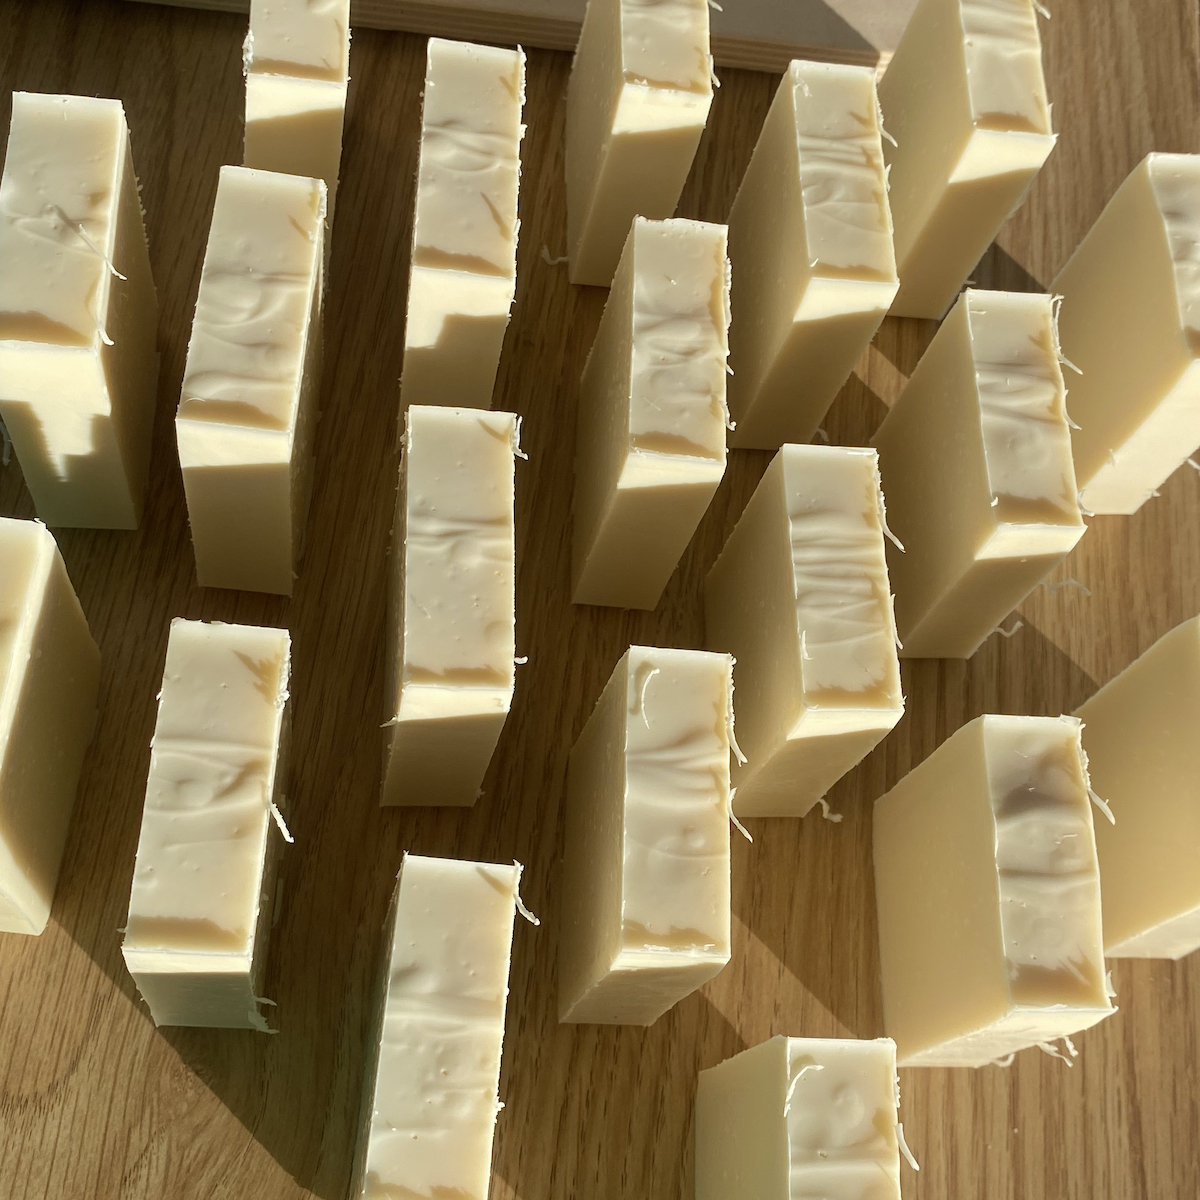 How to Make DIY Body Wash from Bar Soap - Fabulessly Frugal